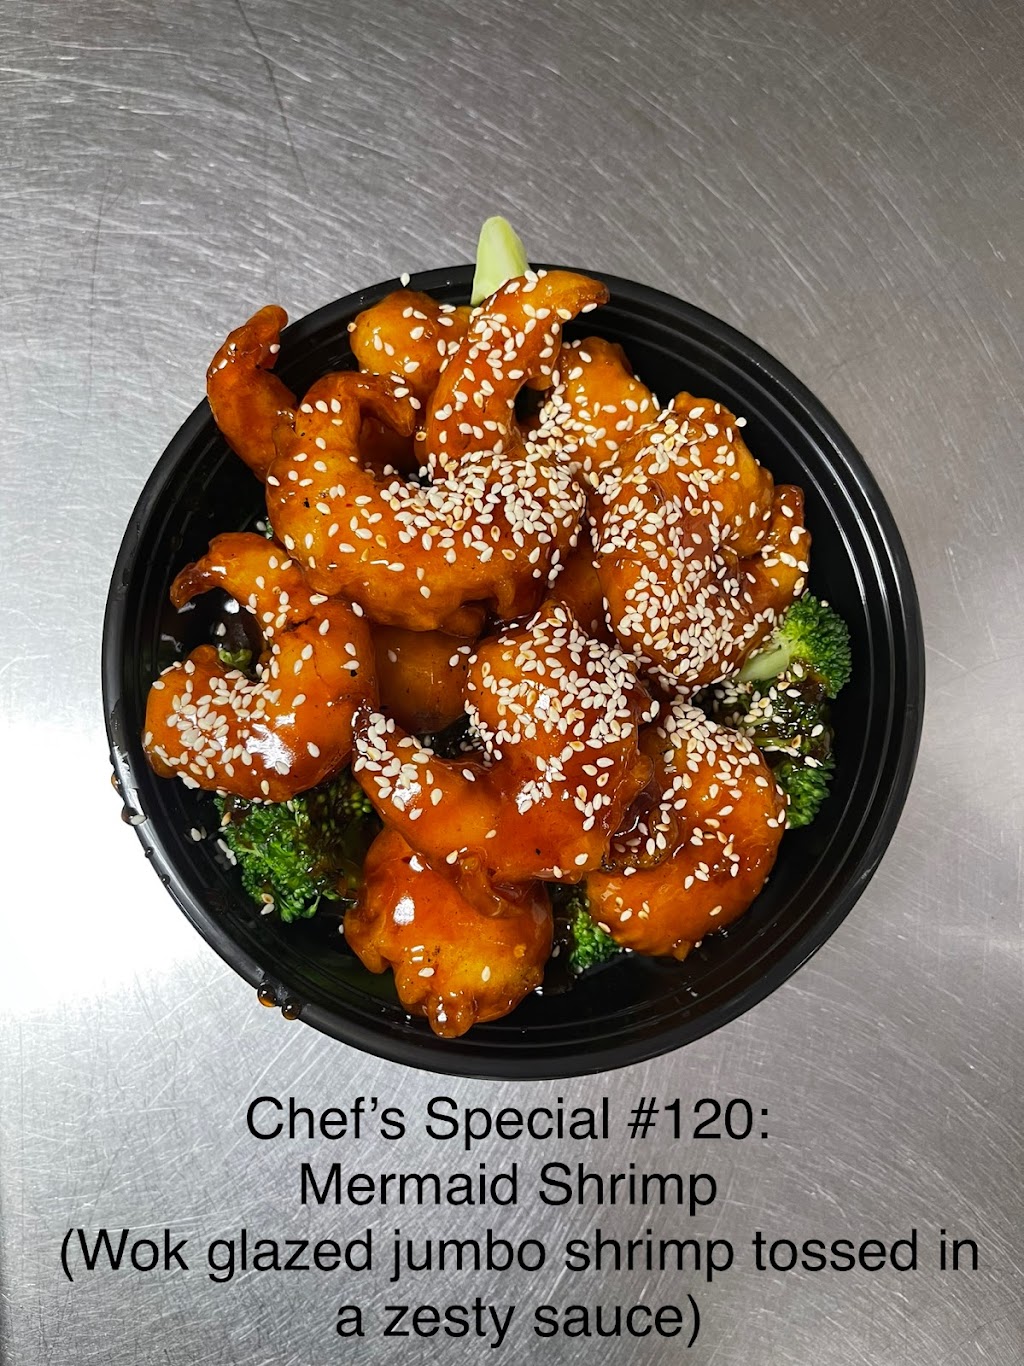 Chins Kitchen | 12 Lakeview Ave, Ludlow, MA 01056 | Phone: (413) 583-8622